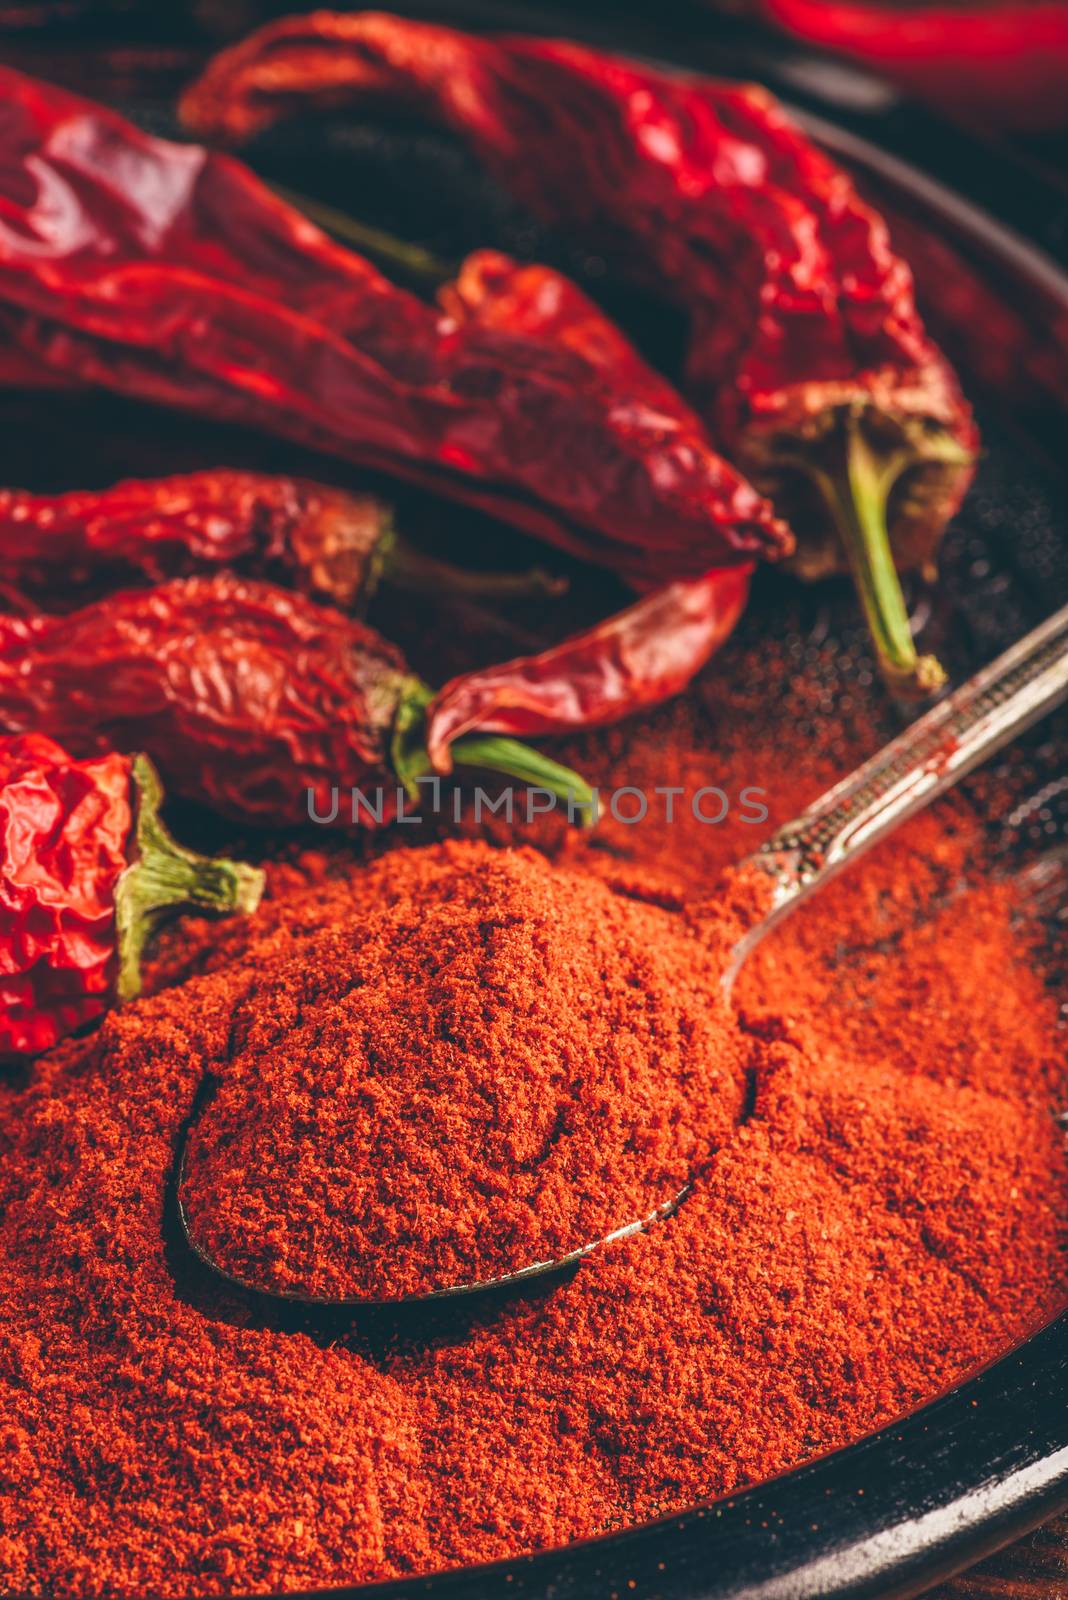 Spoonful of ground red chili pepper with dried peppers